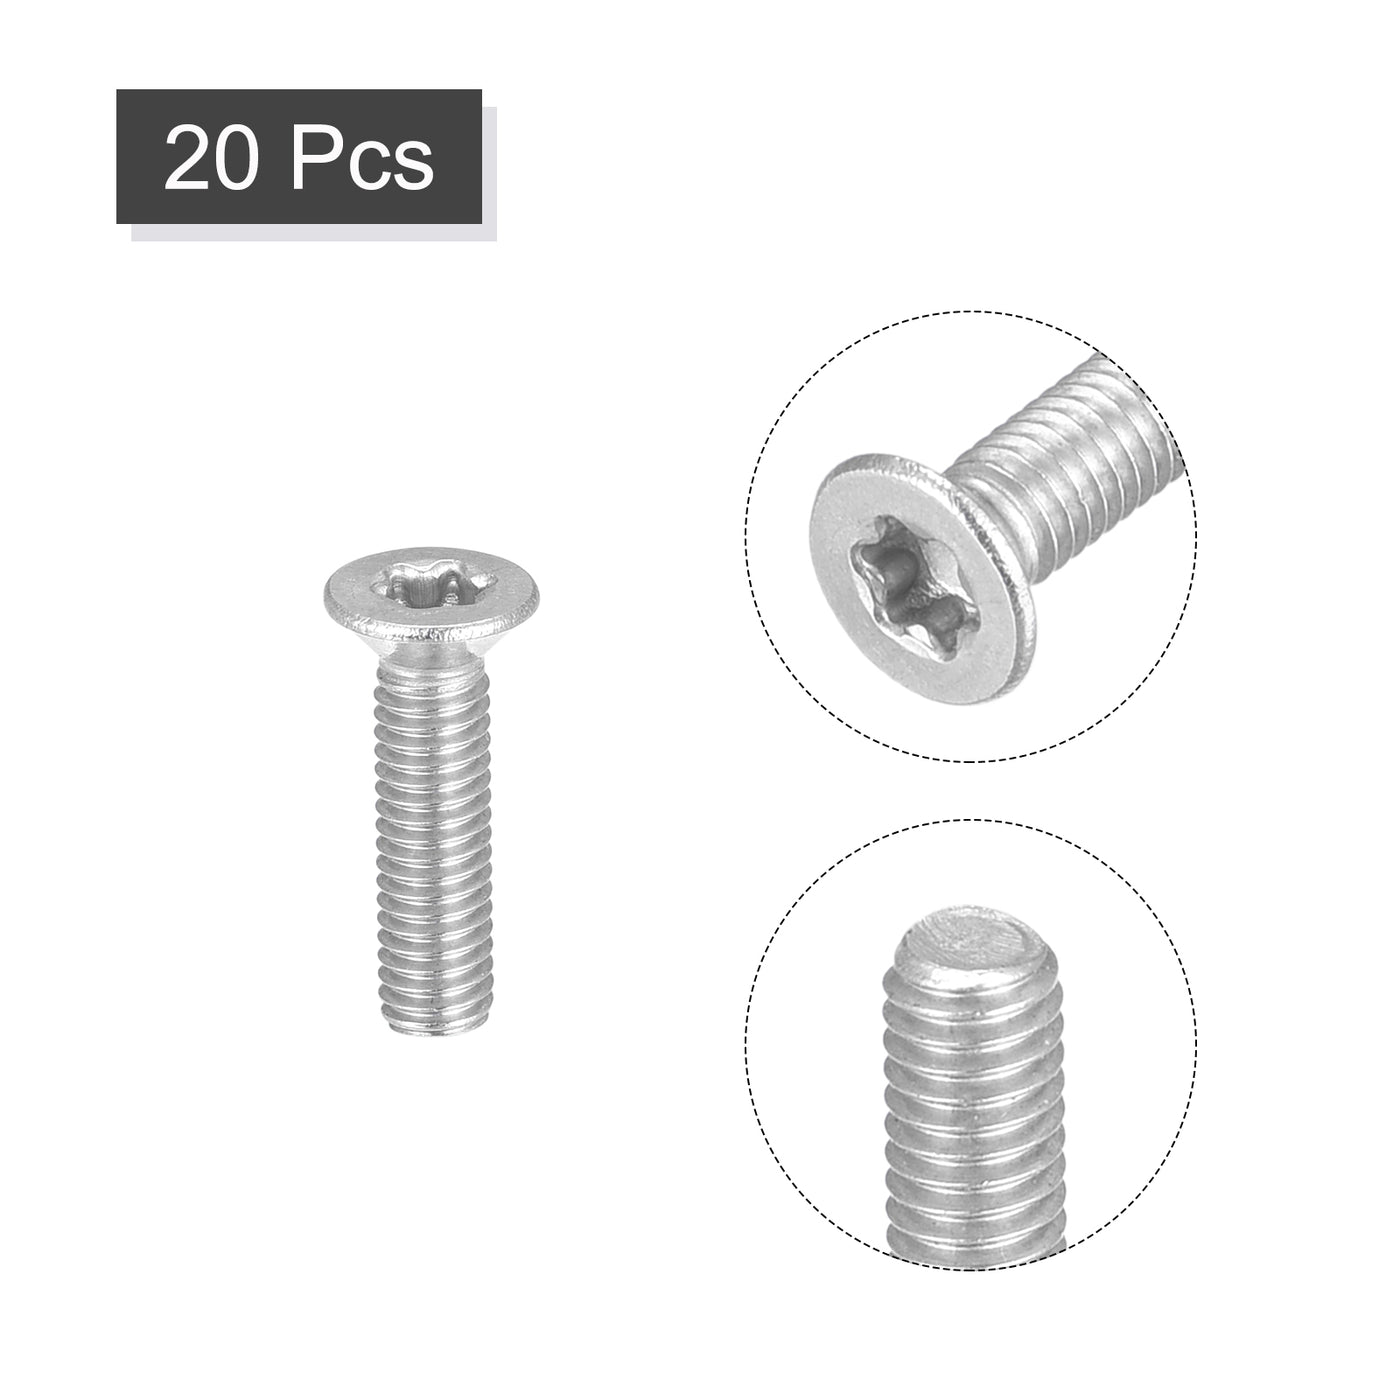 uxcell Uxcell M3x12mm Torx Security Screws, 20pcs 316 Stainless Steel Countersunk Head Screw